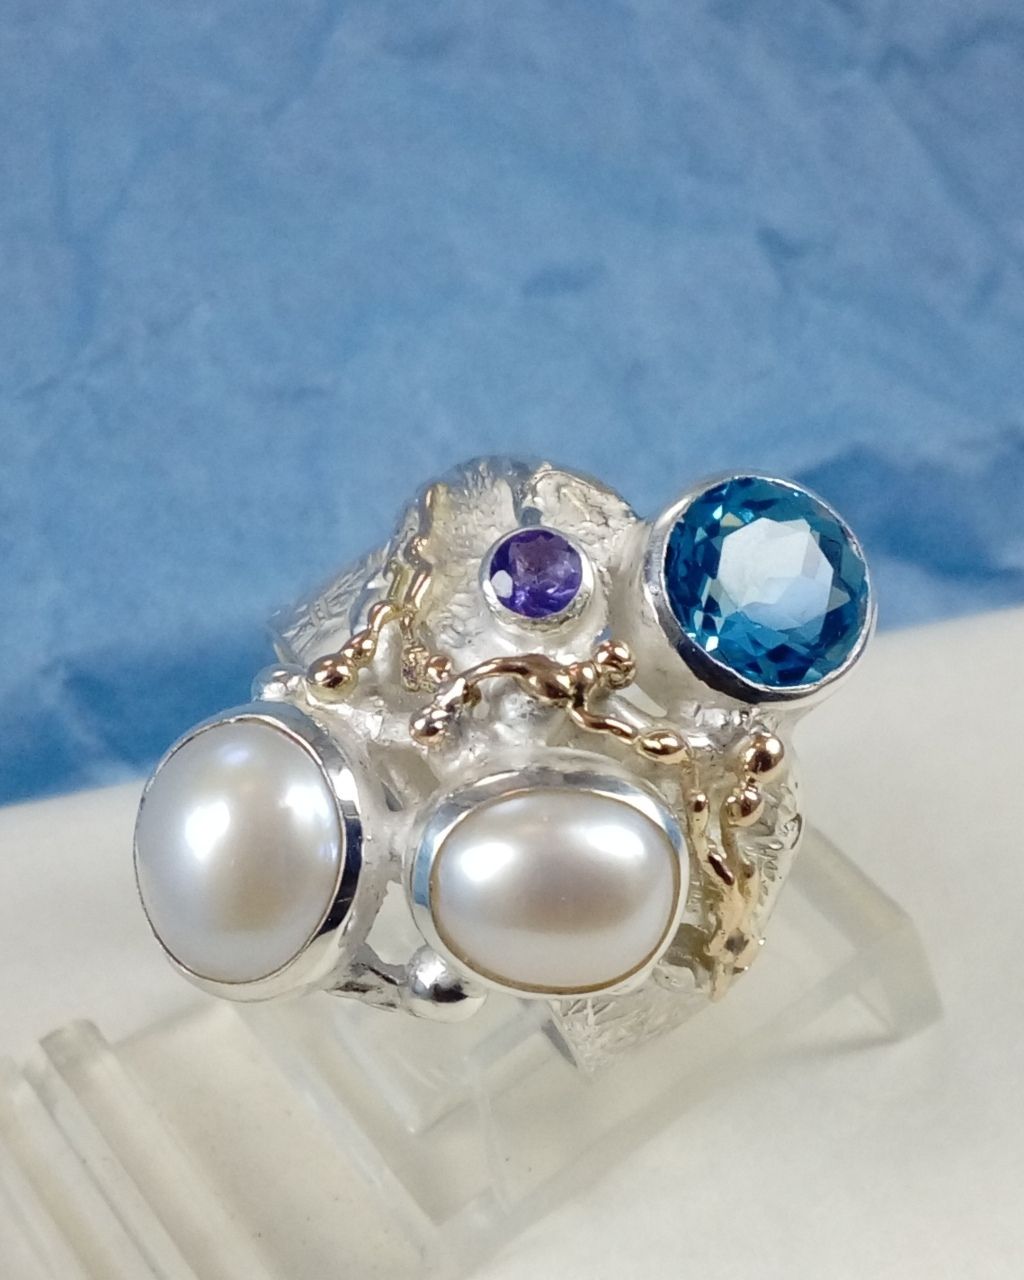 natural pearl and gemstone handcrafted jewelry, silver jewelry with color stones, contemporary jewellery collectible, fine jewellery with gemstones for aucitons, art jewelry with facet cut gemstones and natural pearls, contemporary jewelry with real stones, contemporary jewelry made by artist, Gregory Pyra Piro ring 7320, jewelry with amethyst and blue topaz together, ring with topaz and pearl together, ring with amethyst and pearl together,jewellery artist in Europe, designer jewellery sold at auctions and art galleries, where to find auctions with fine art and designer jewellery, bidding on auctions with designer jewellery, ring with amethyst and blutopaz, rings sold in art and craft galleries